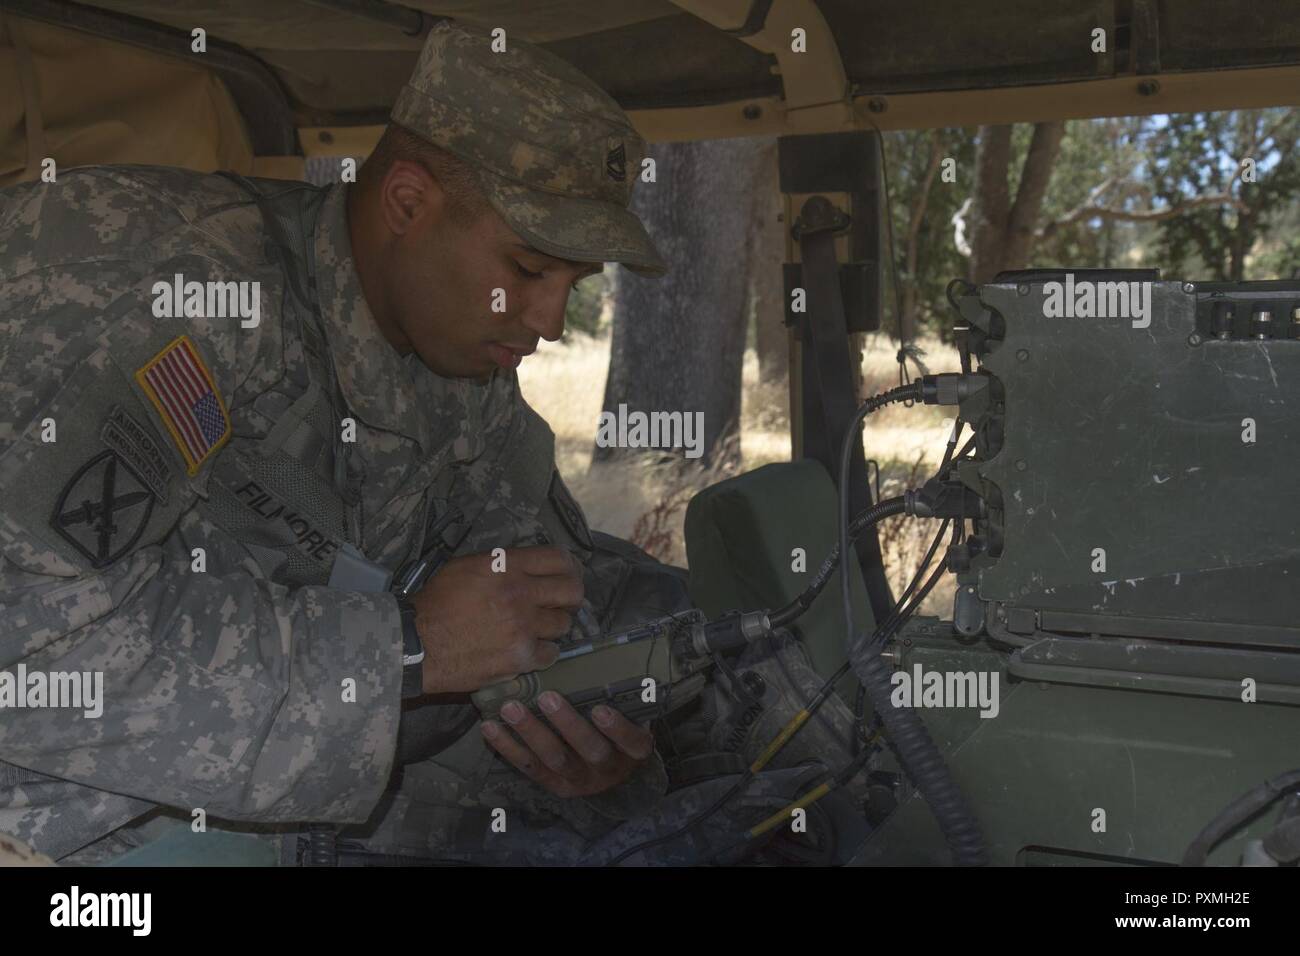 U.S. Army Sgt. 1st Class Armando Filmore, an Observer Controller Trainer (OCT) from the 3rd of the 290th Regiment, installs a Single Channel Ground and Airborne Radio System (SINCGARS) during the 91st Training Division’s Warrior Exercise on Fort Hunter Liggett, Calif. June 15, 2017. SINCGARS uses 25 kHz channels in the very high frequency FM band, from 30.000 to 87.975 megahertz. Stock Photo